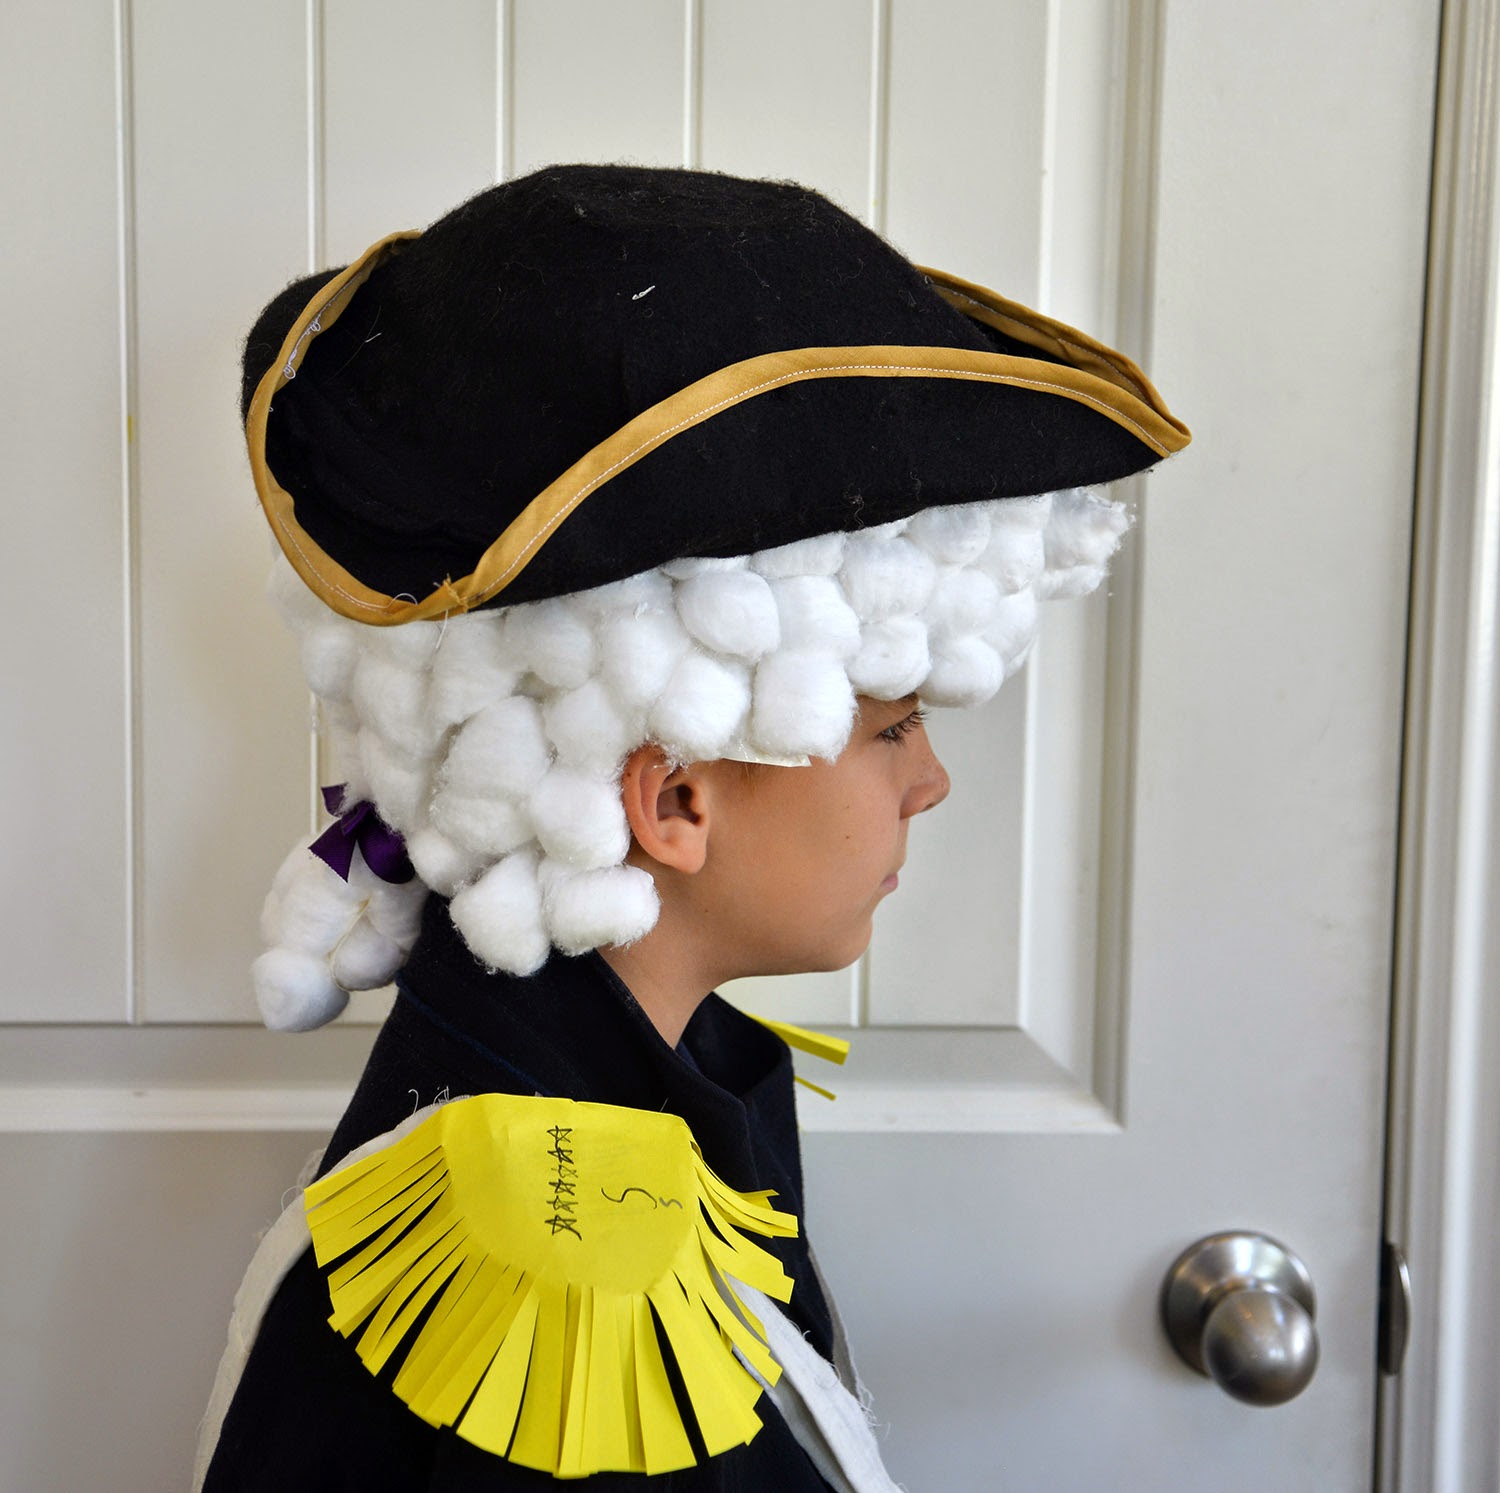 A school of fish: George Washington, and making powdered wigs